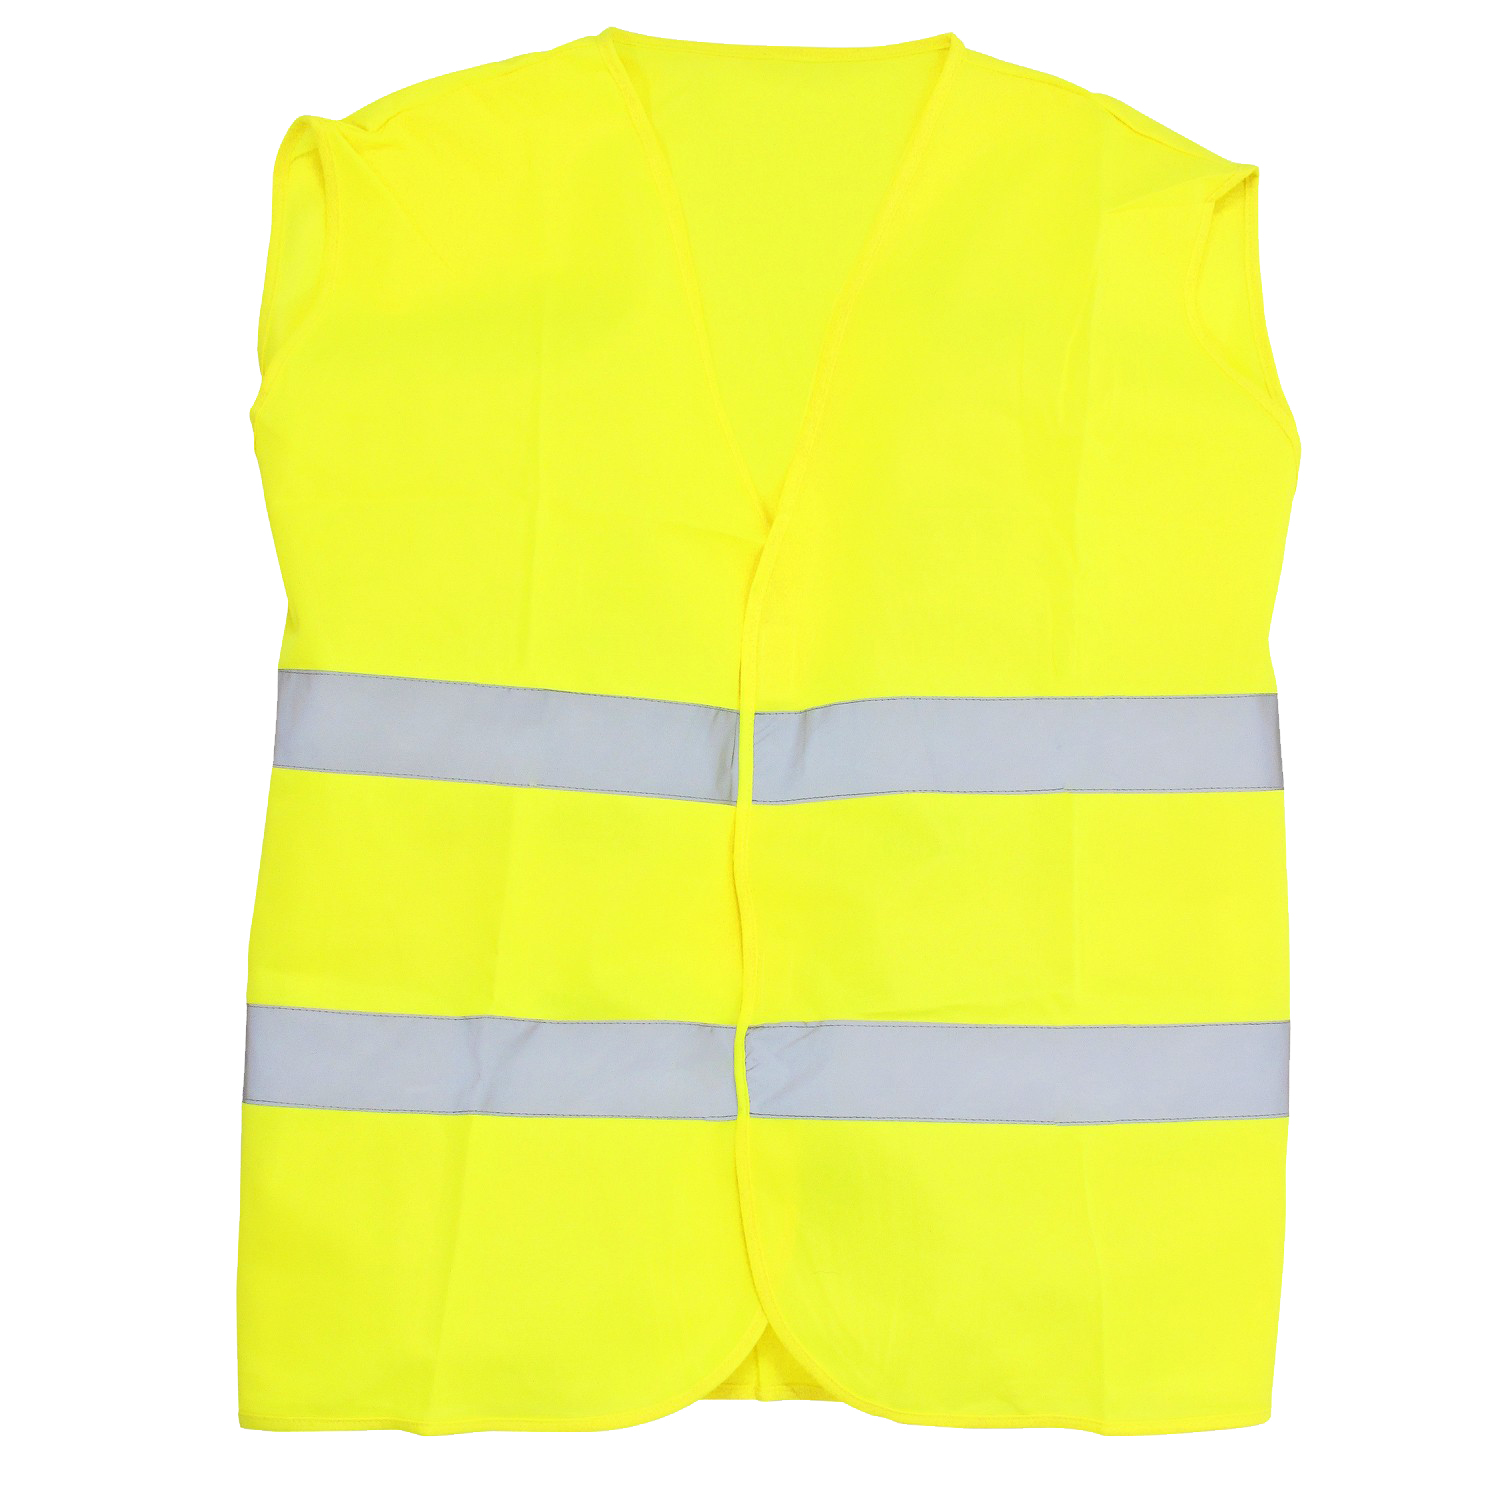 Yellow warning vest by Marc&Mark in oversizes up to 10XL